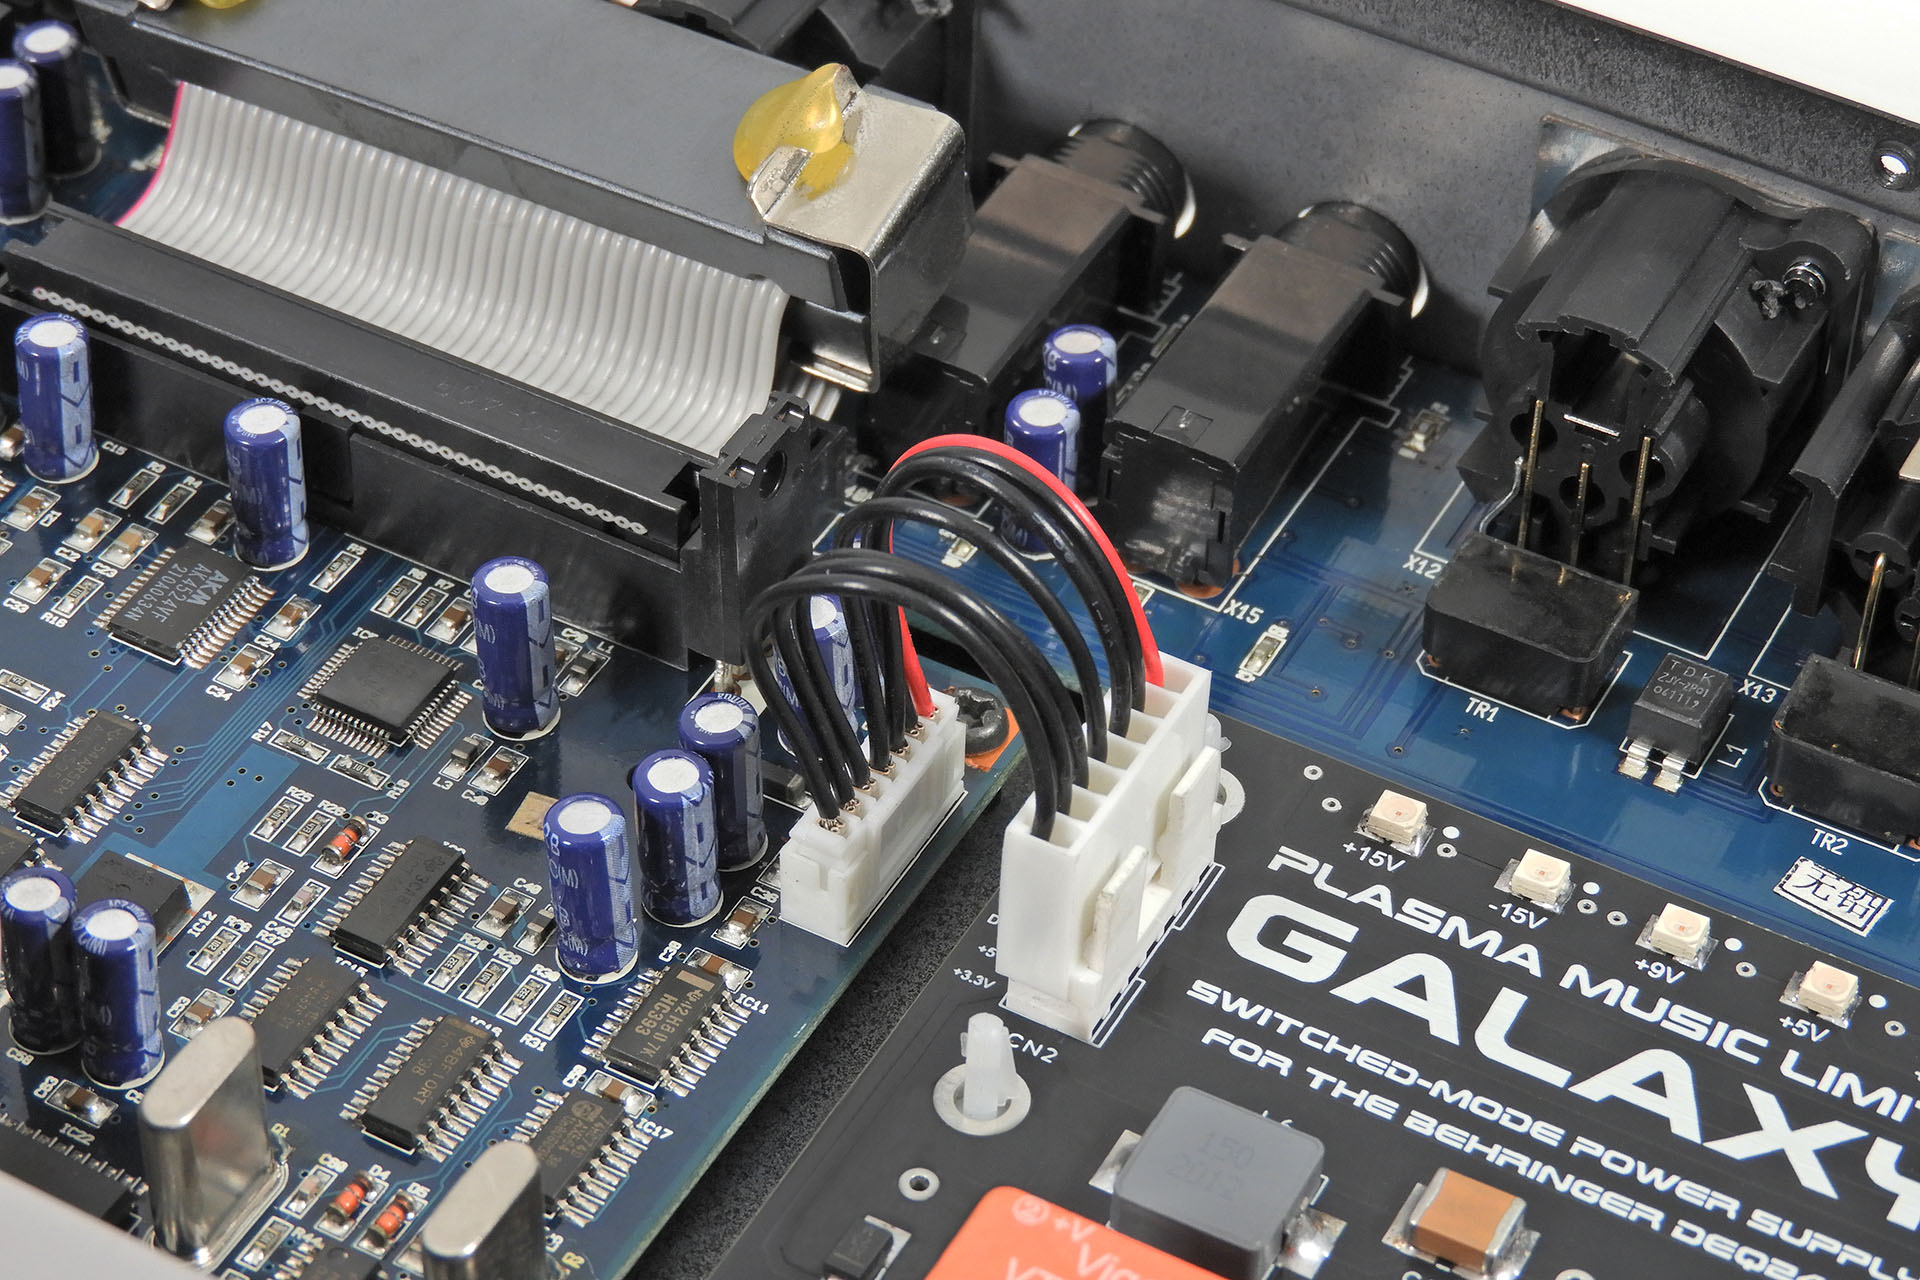 Molex to JST connector from Galaxy to DEQ2496 main-board